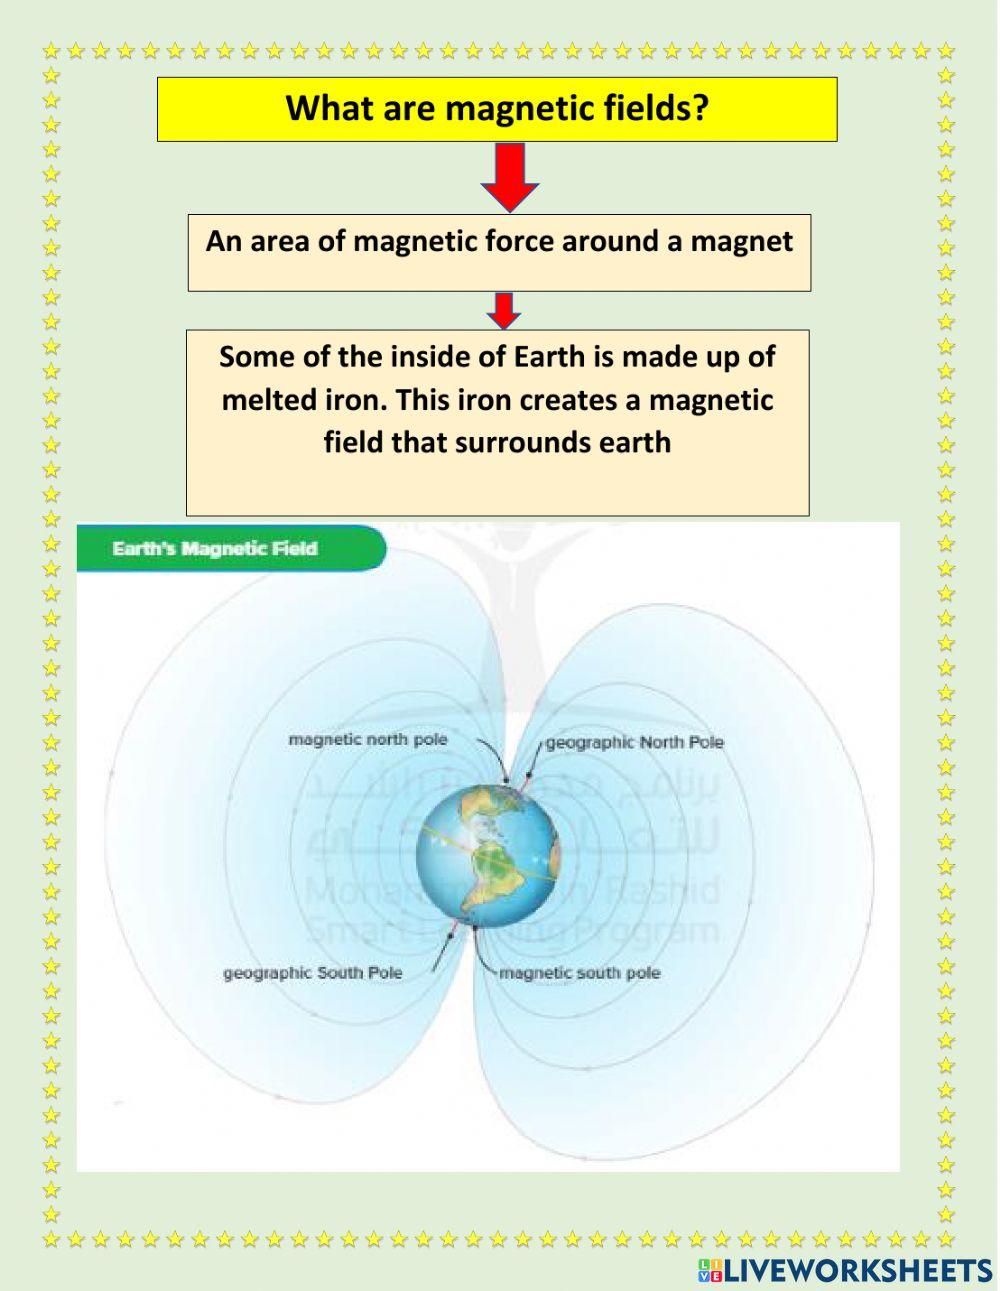 Chapter 7 lesson 6 MAGNETISM AND ELECTRICITY PART 1